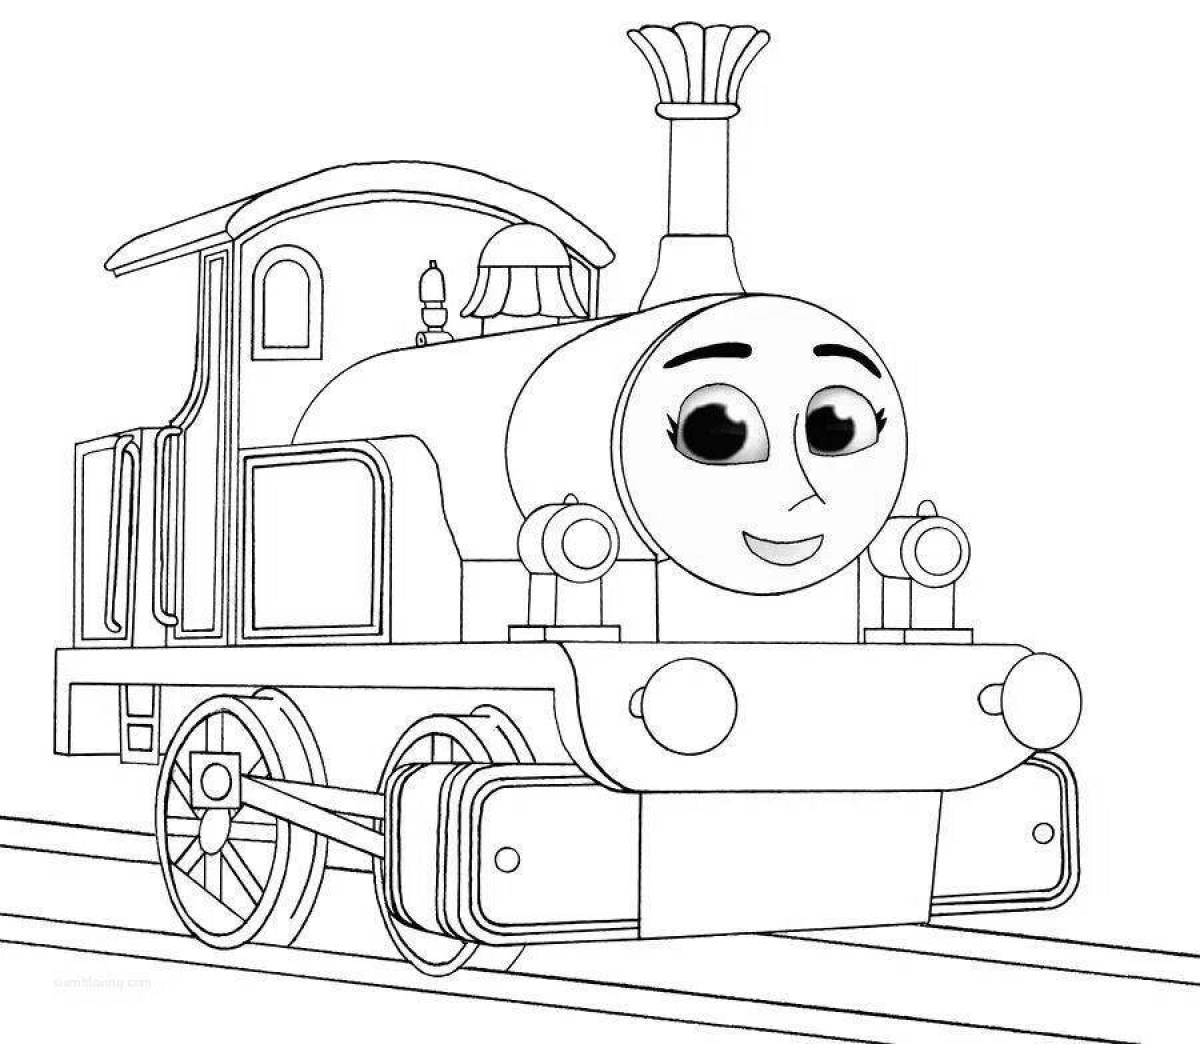 Colorific charlie the tank engine coloring page